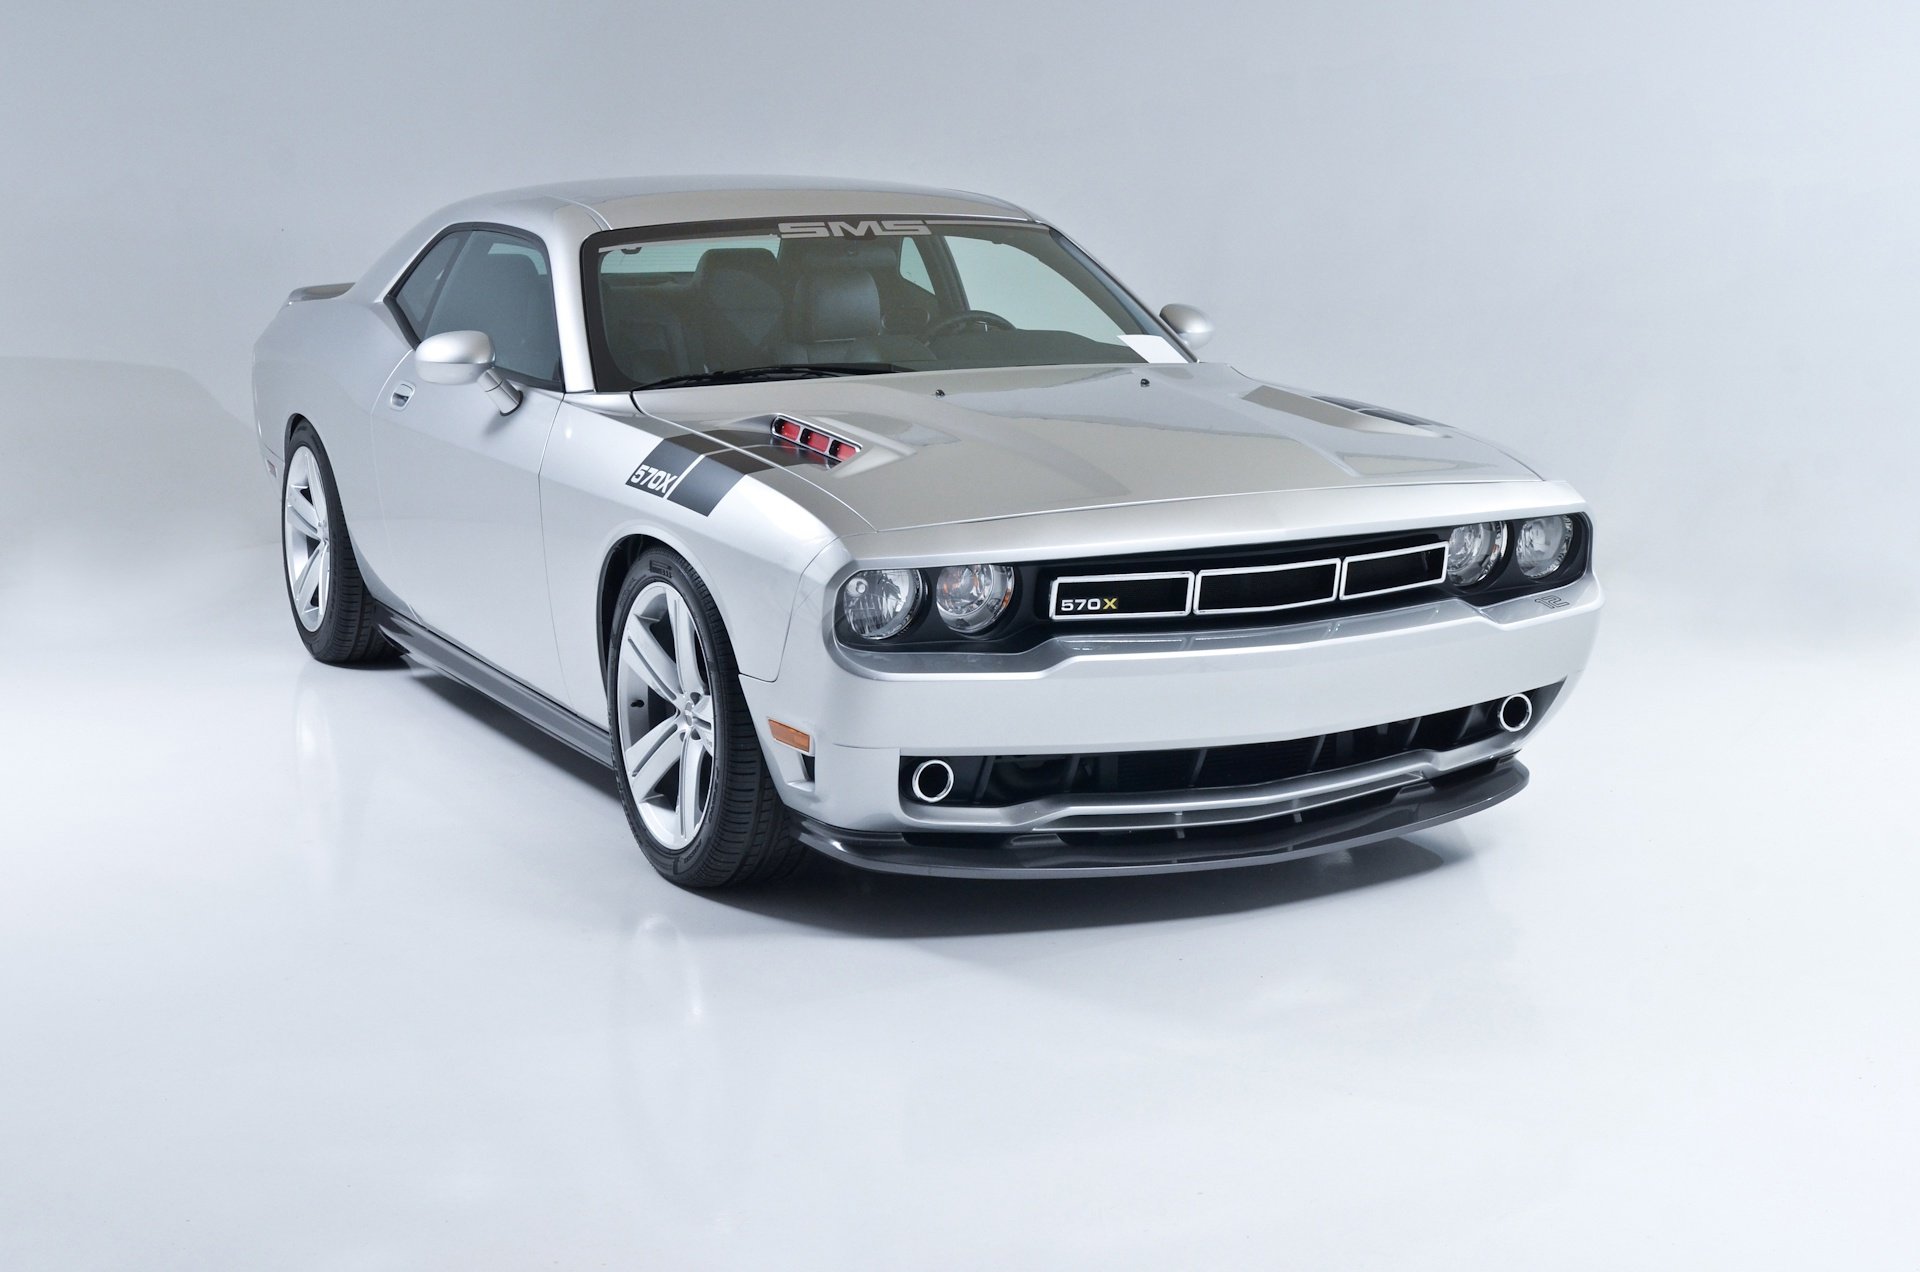 sms, 570x, Challengers, Coupe, Cars, Dodge, Modified Wallpaper